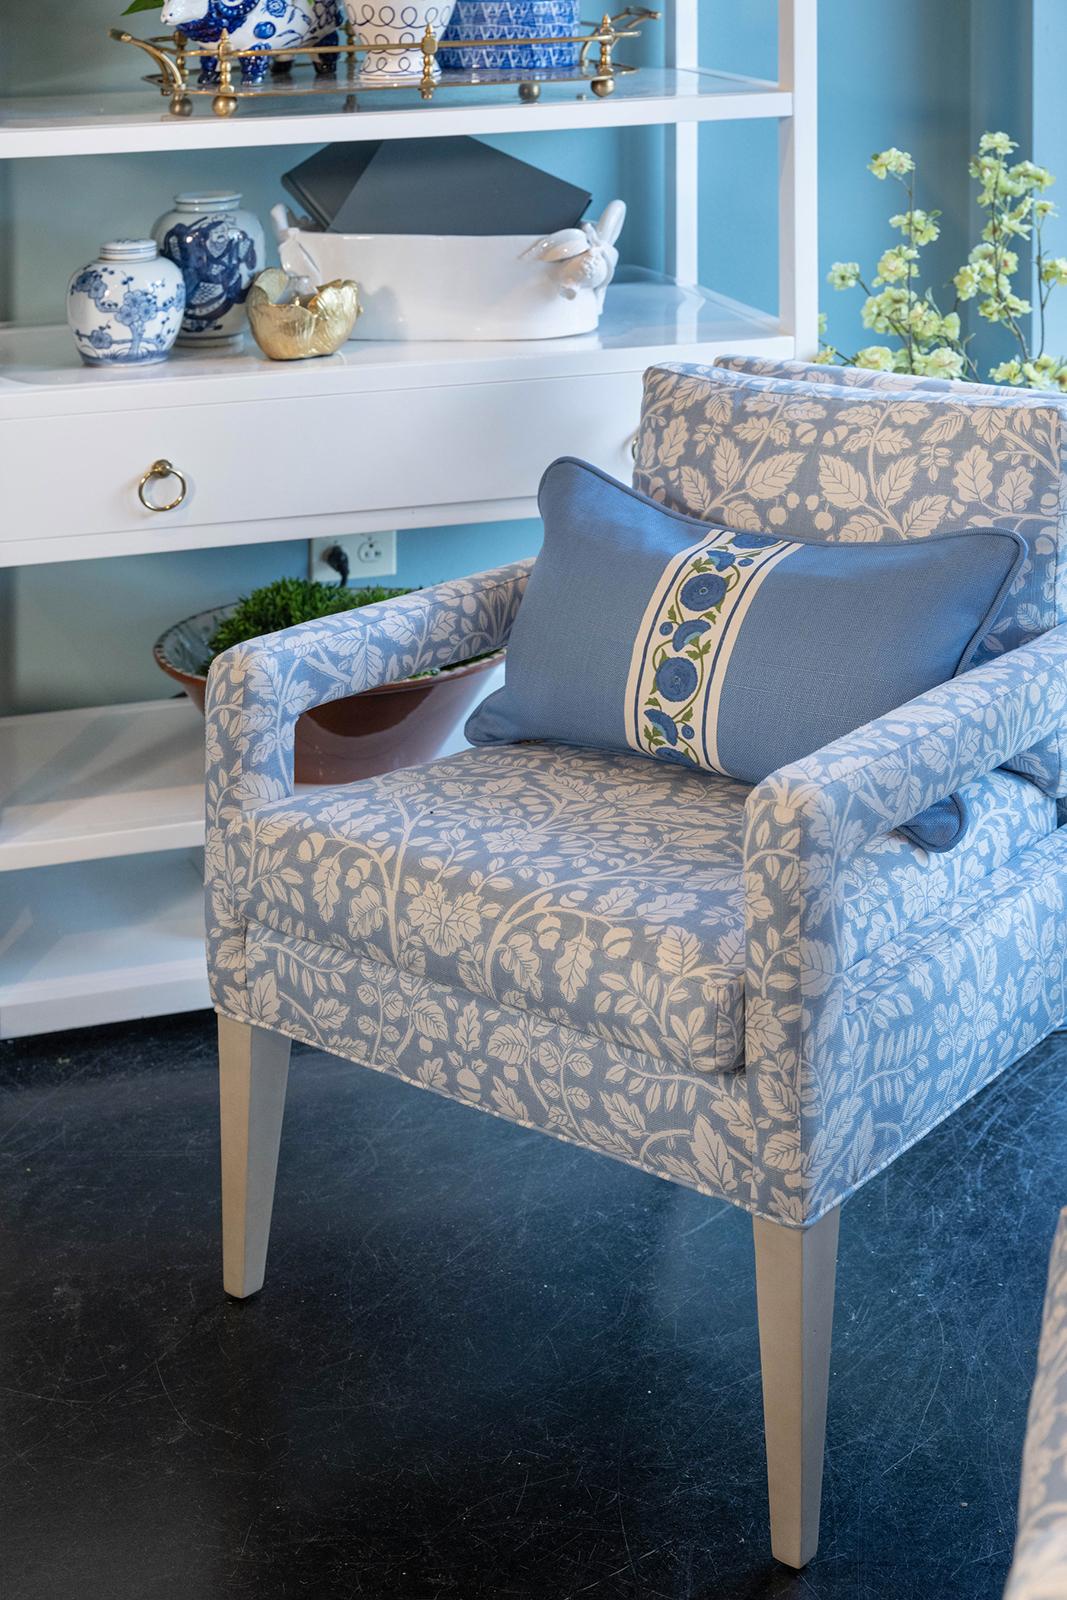 Swirling vines with leaves are repeated in the fabric of the Vallone chair, the tape trim on the pillow, and on the blue and white accessories on the shelving. (Handout/TNS)